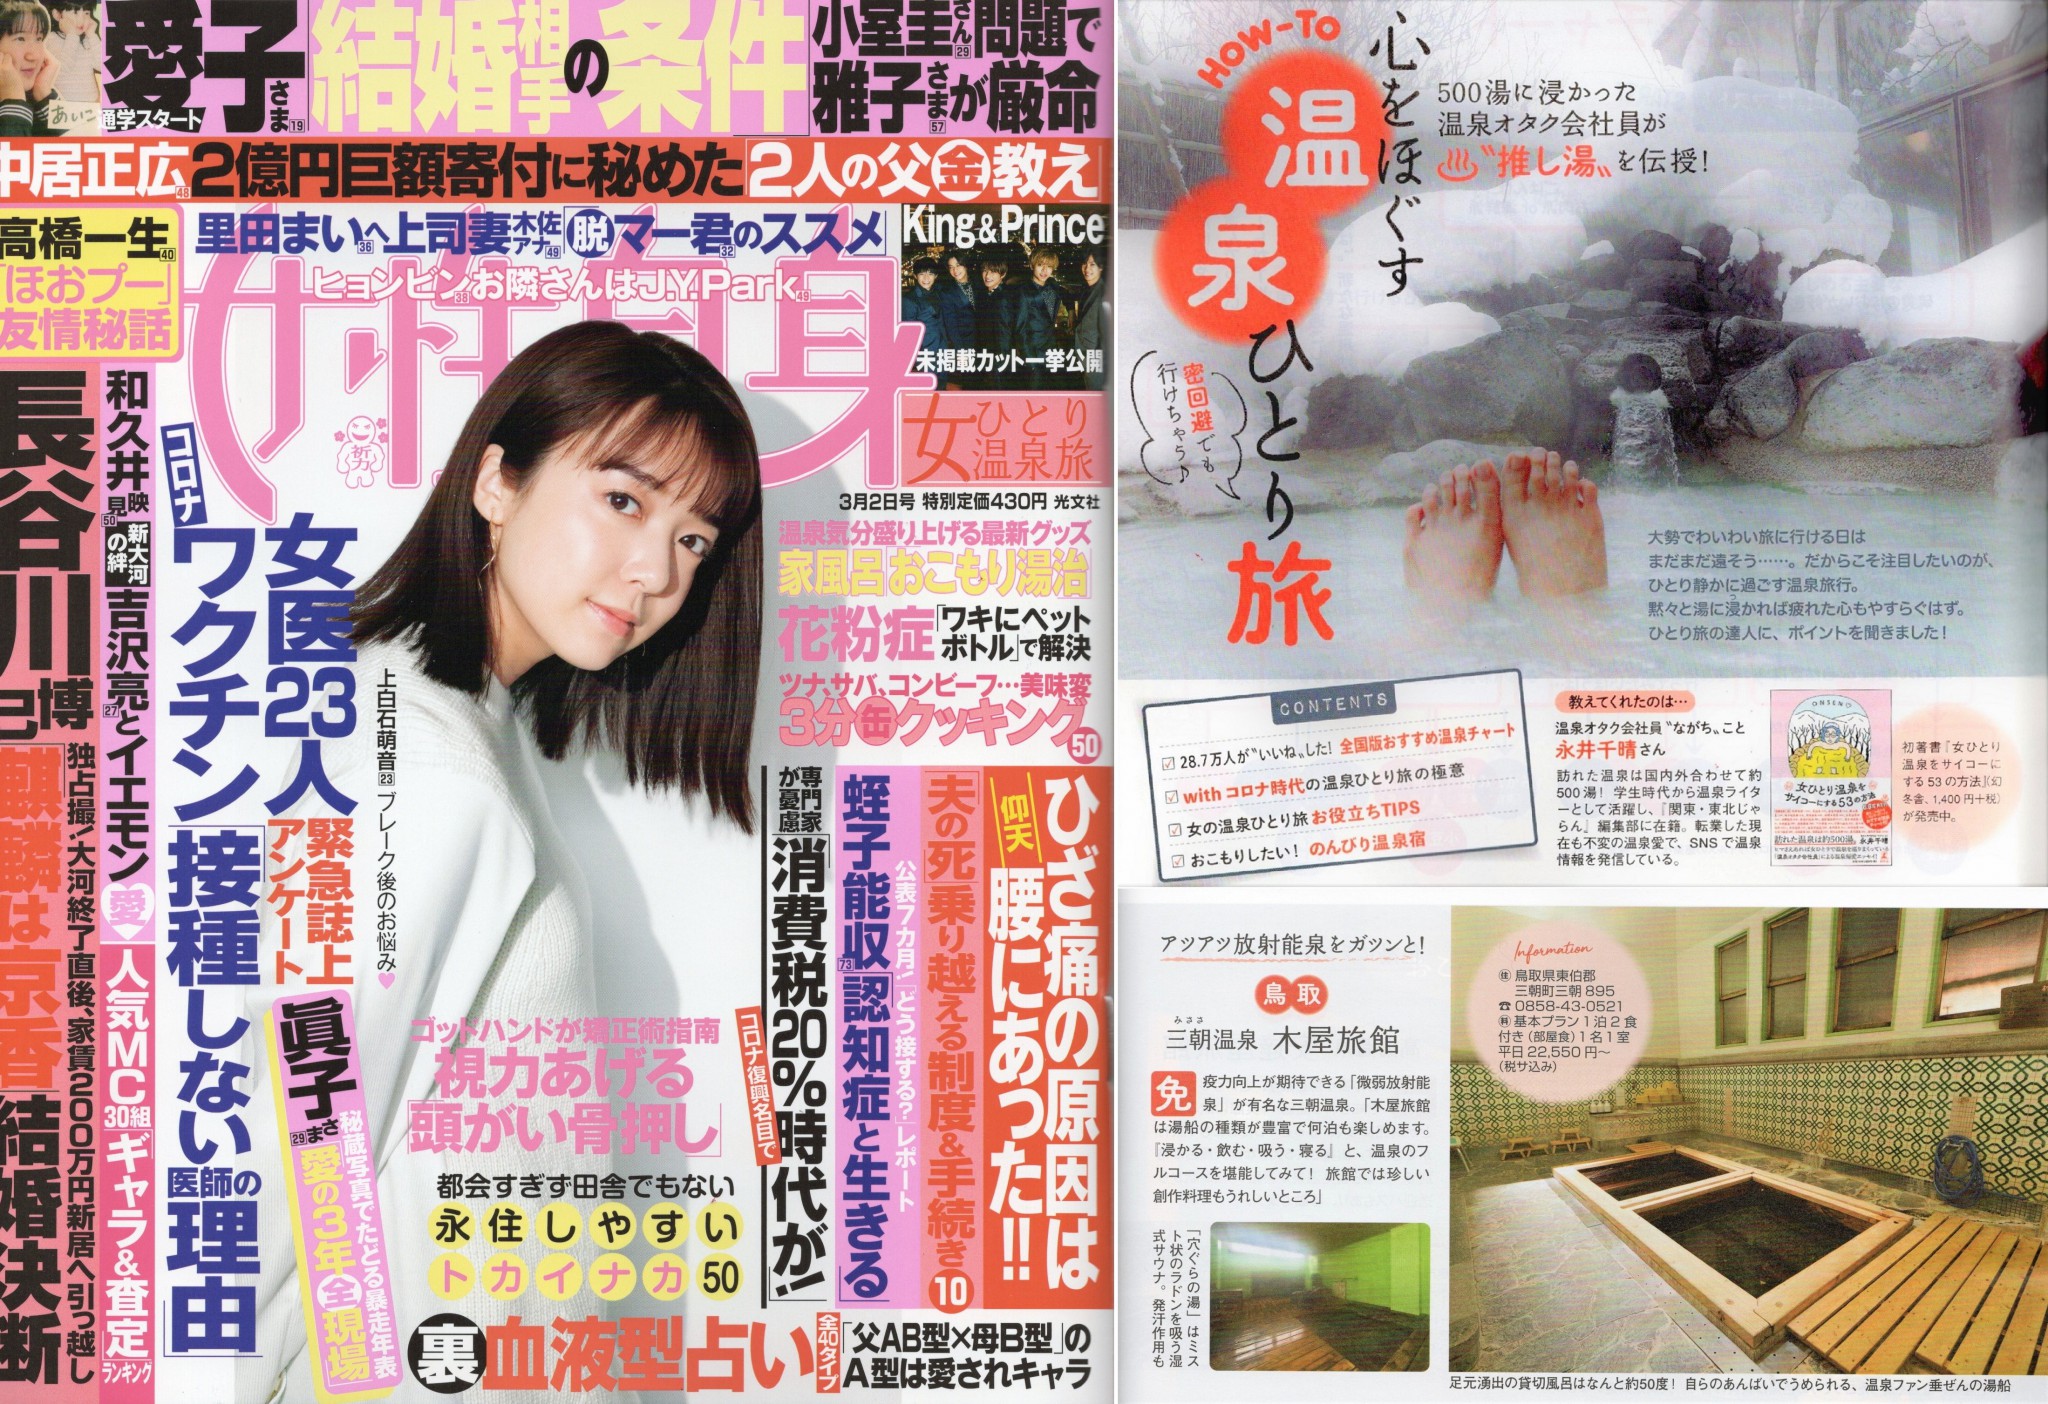 Josei Jishin March issue “Solo Onsen Trip to Soothe Your Soul” 